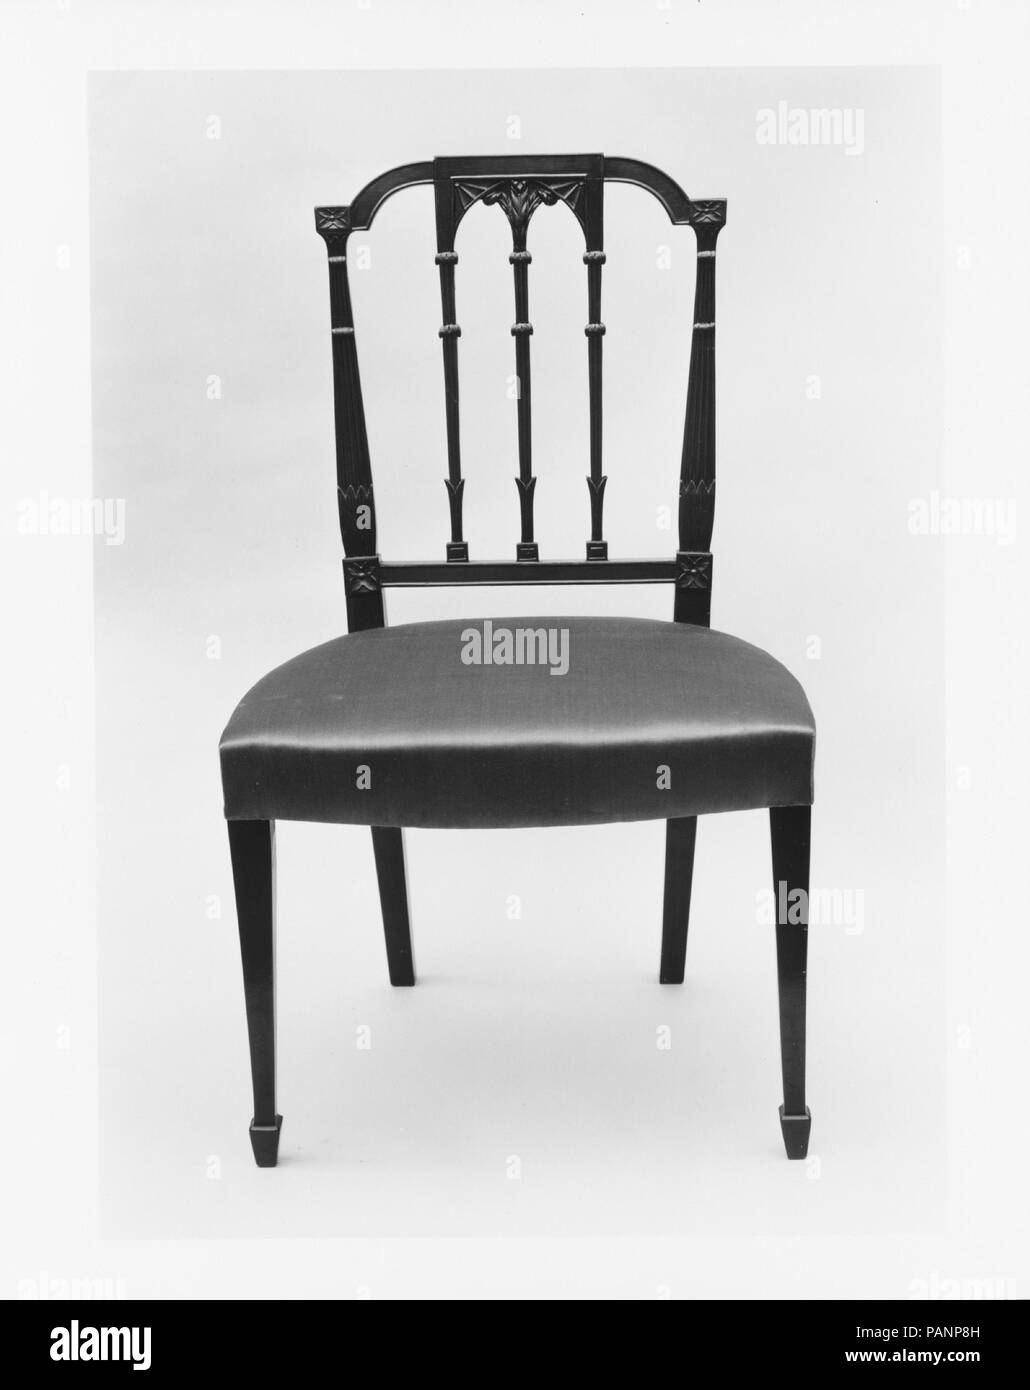 Side Chair. Culture: American. Dimensions: 37 x 21 x 18 in. (94 x 53.3 x 45.7 cm). Date: 1795-1810. Museum: Metropolitan Museum of Art, New York, USA. Stock Photo